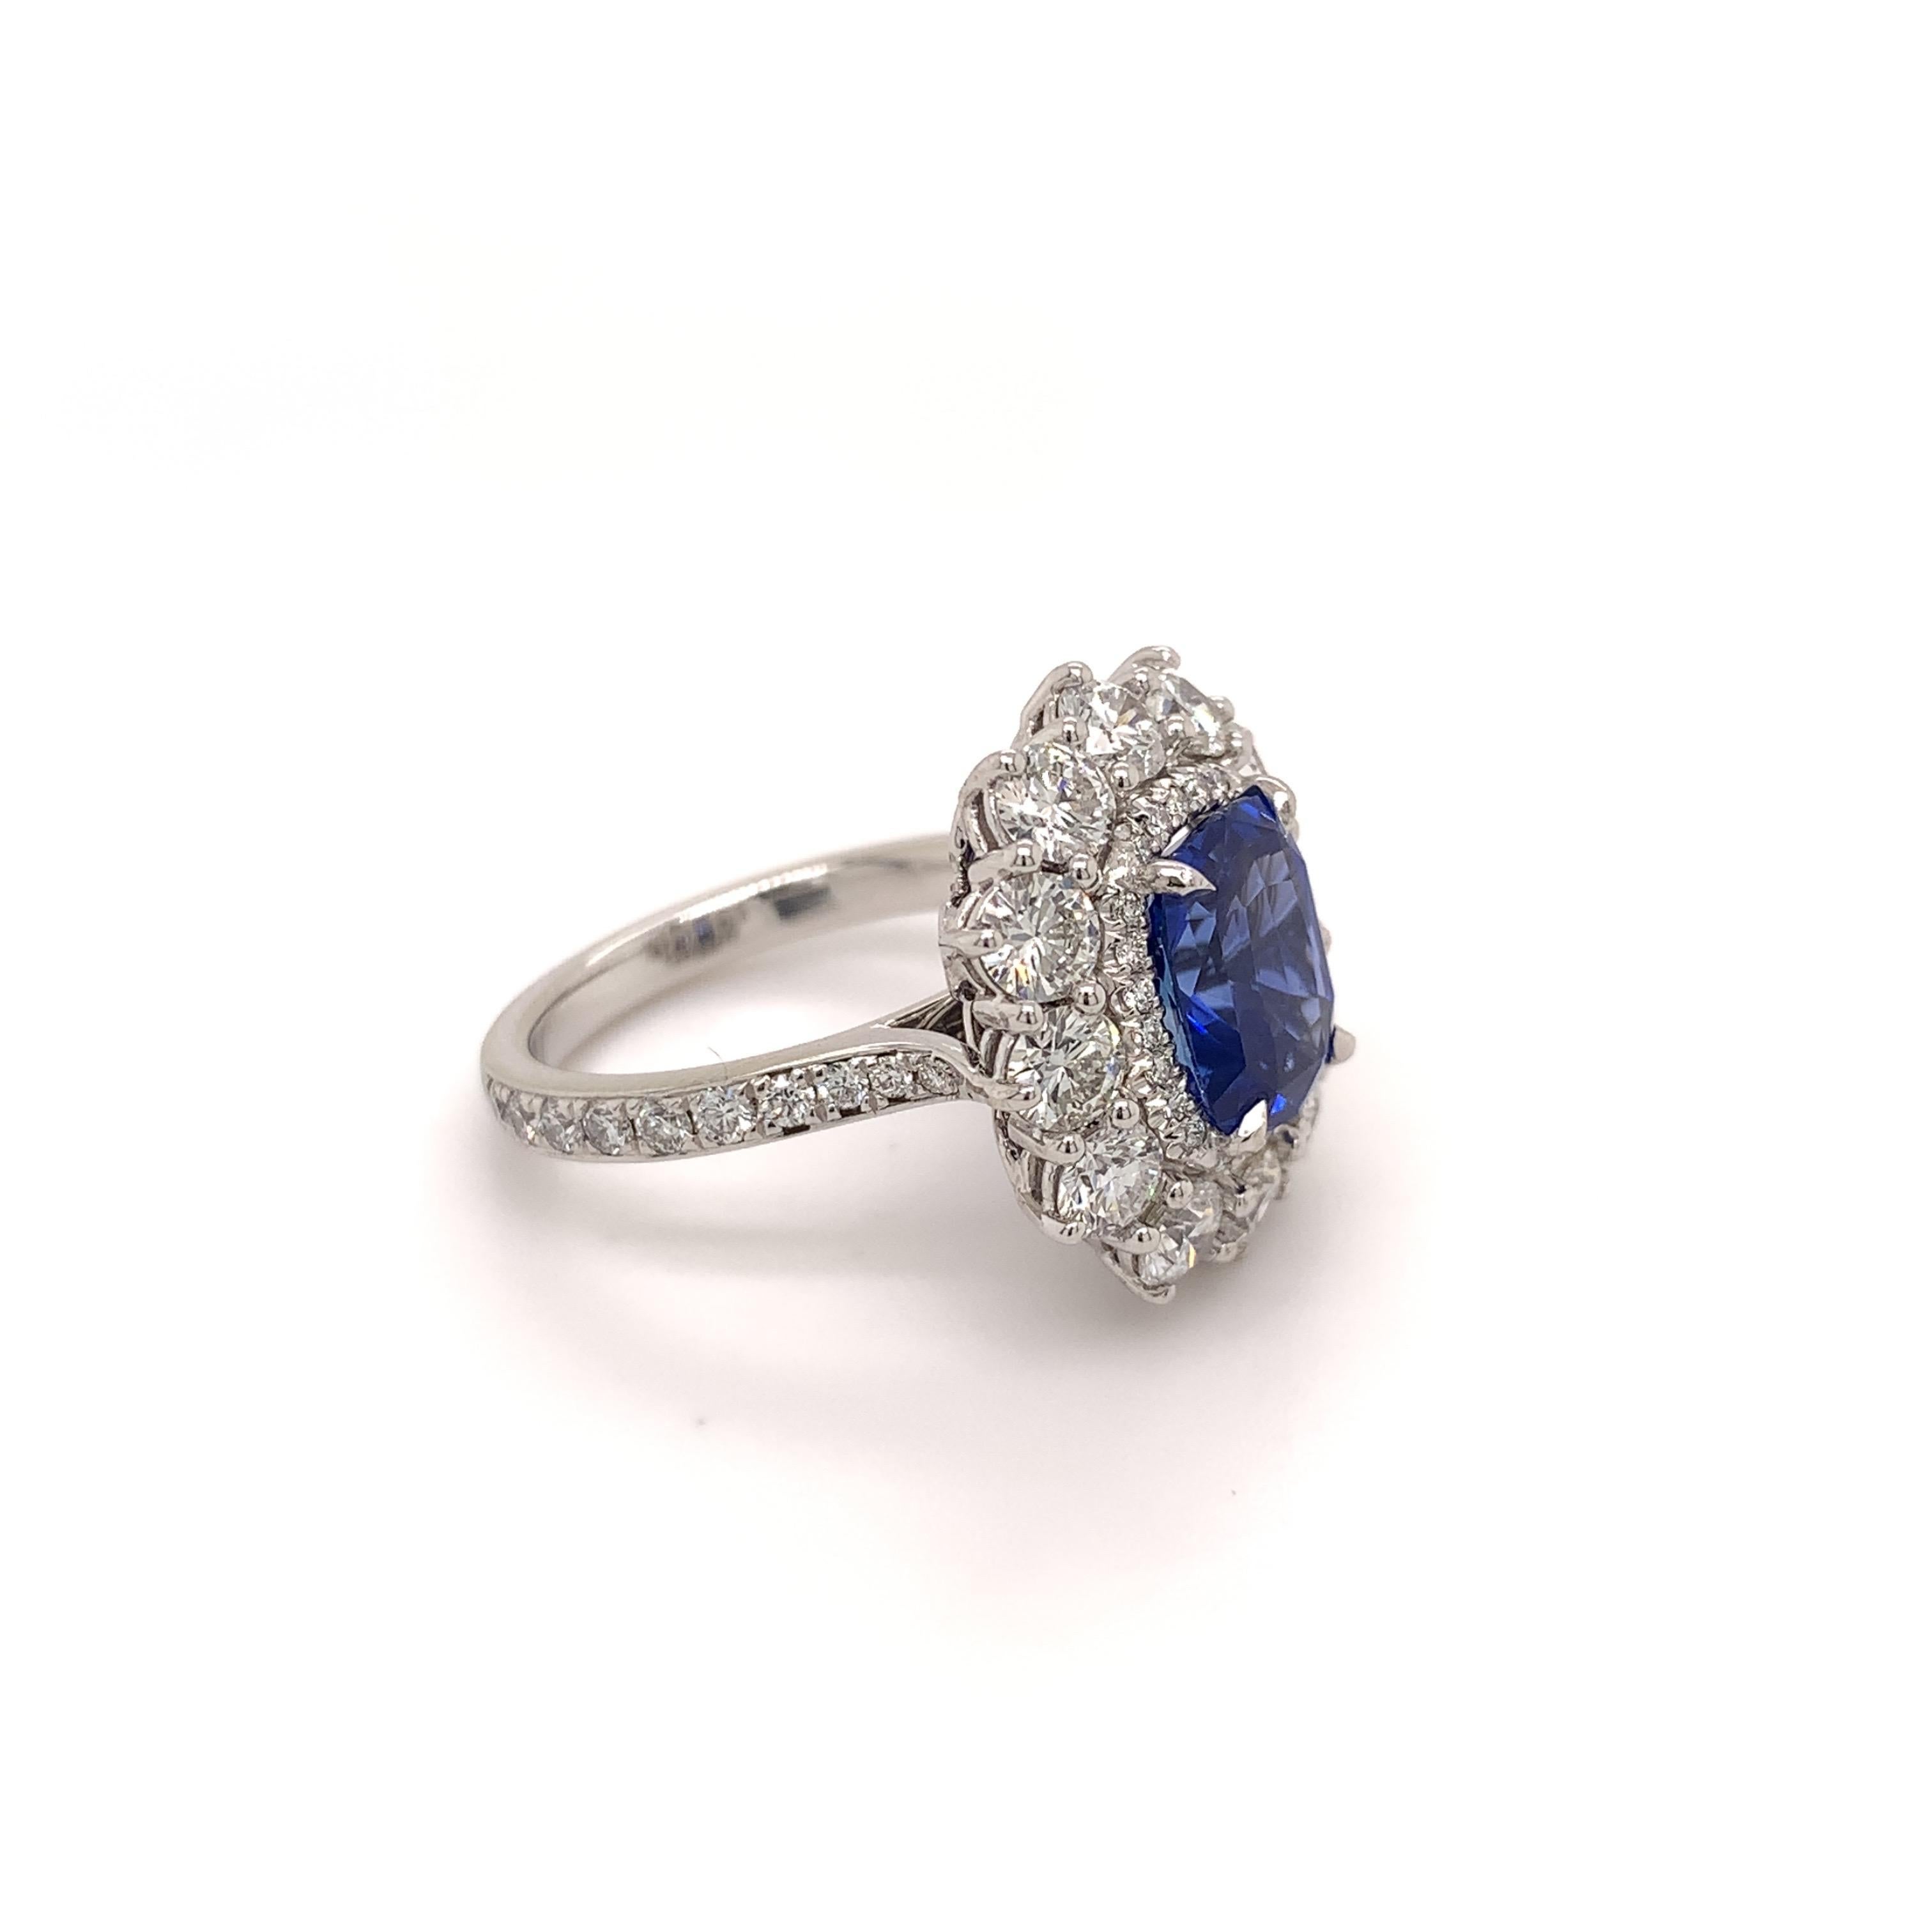 Glamorous sapphire diamond ring. High brilliance, violetish blue, cushion faceted natural 3.53 carats sapphire encased in basket mounting with four knife prongs, accented with two rows of round brilliant cut diamonds. Beautiful handcrafted